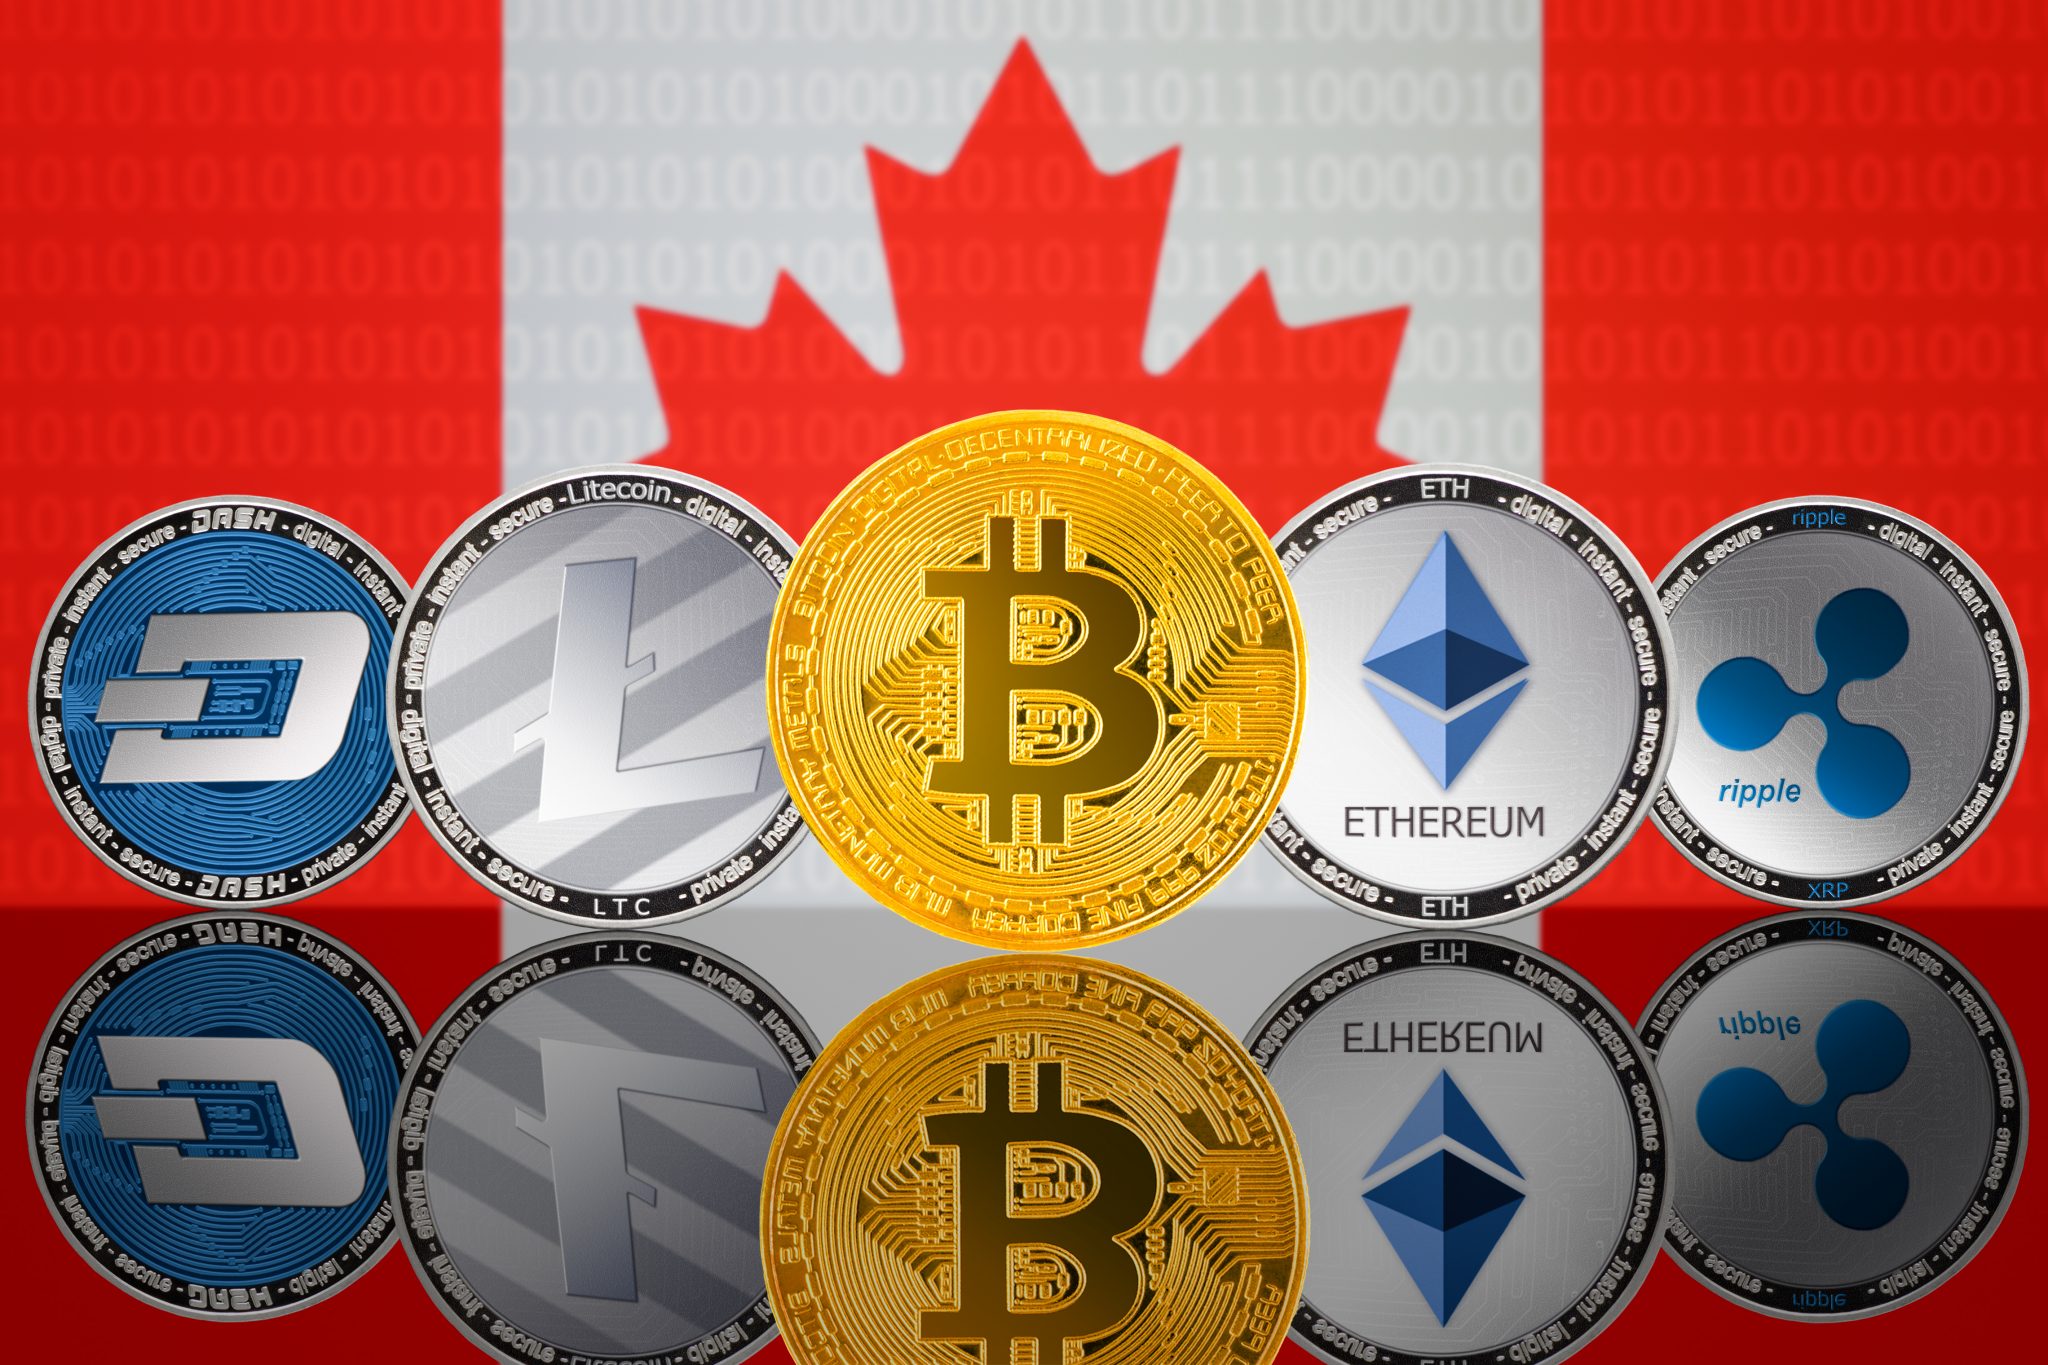 Cryptocurrency coins - Bitcoin (BTC), Litecoin (LTC), Ethereum (ETH), Ripple (XRP), DASH on the background of the flag of CANADA. Front view